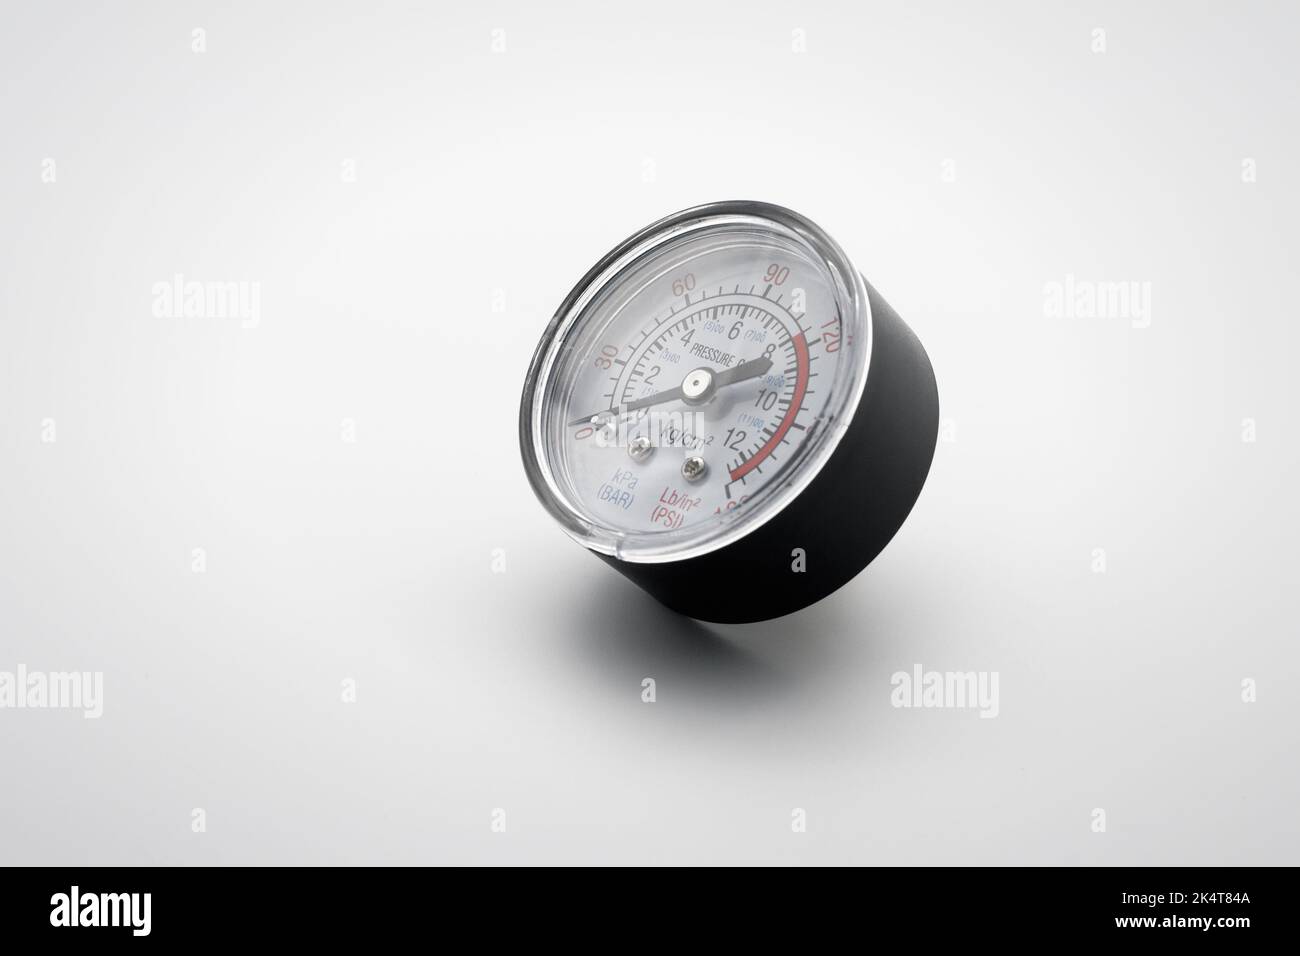 Small pressure gauge. Close-up. On white background. Stock Photo